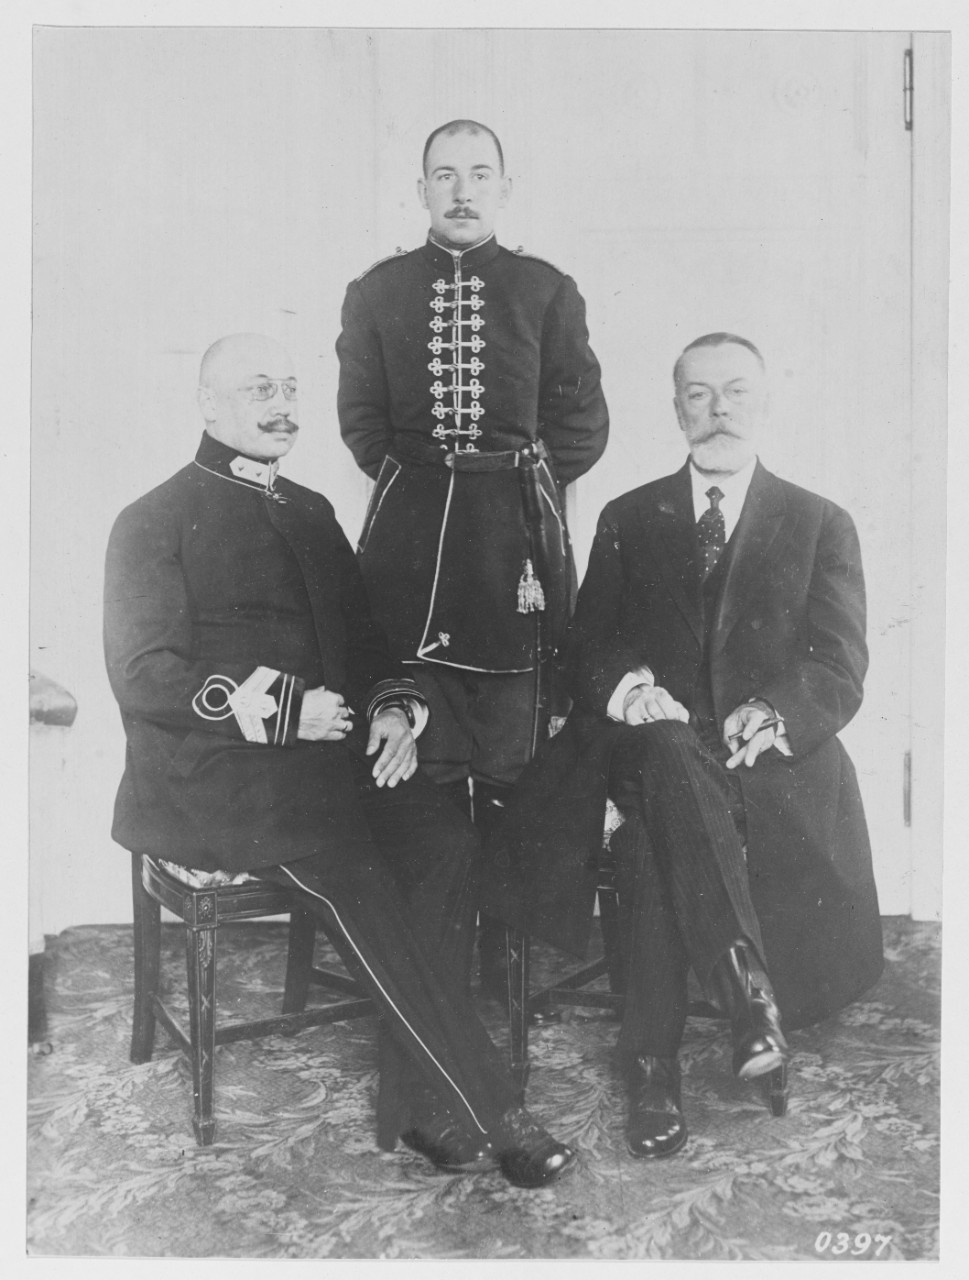 From L to R: Sub- secretary of State Von Paltow, standing riding master Ktschn Bey; right, Minister Lisogoub.